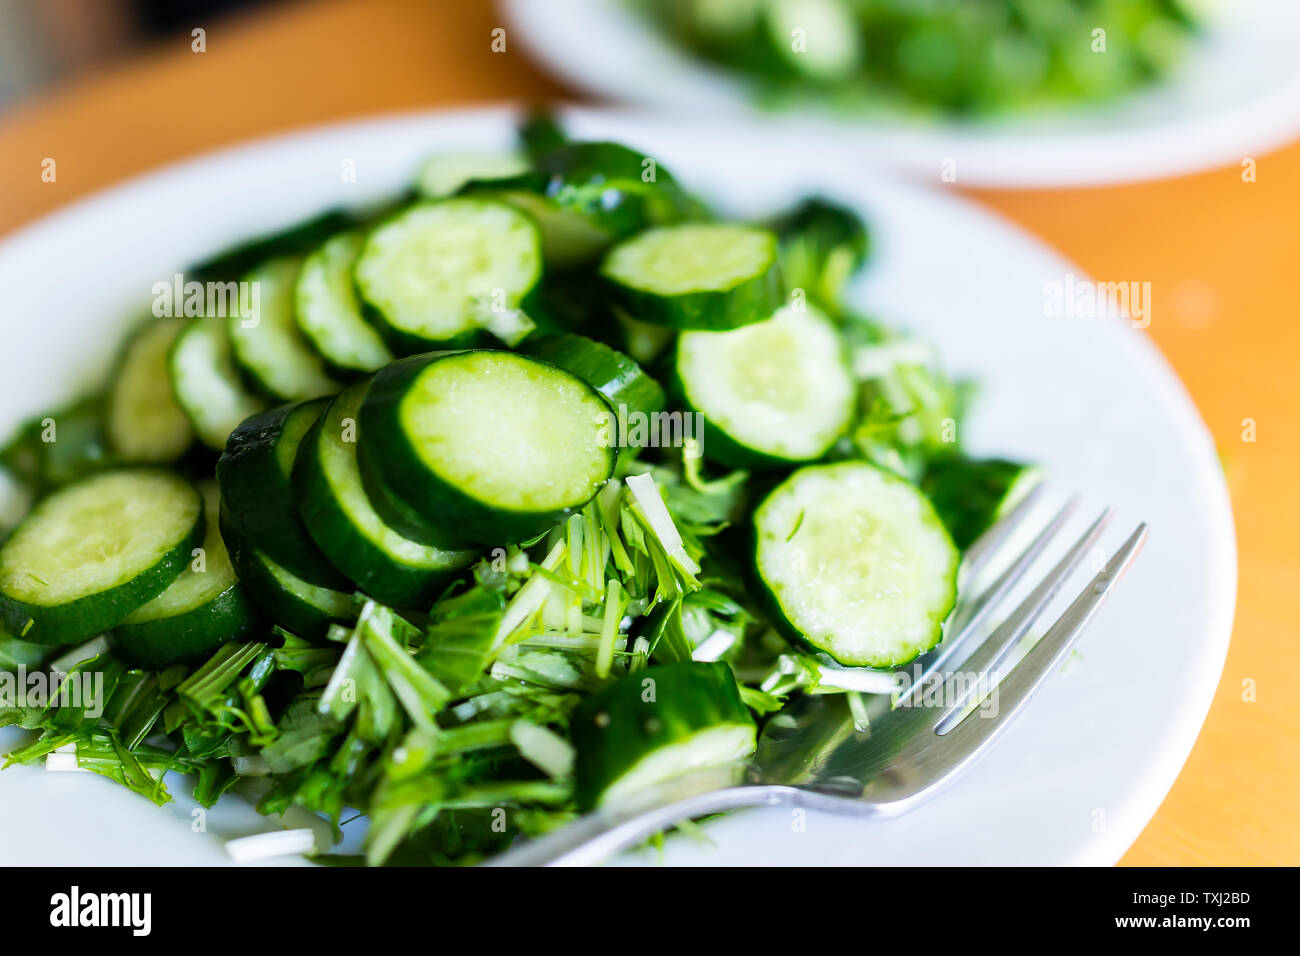 Home or restaurant with table and green salad dish closeup with Japanese cucumbers and mizuna greens Stock Photo